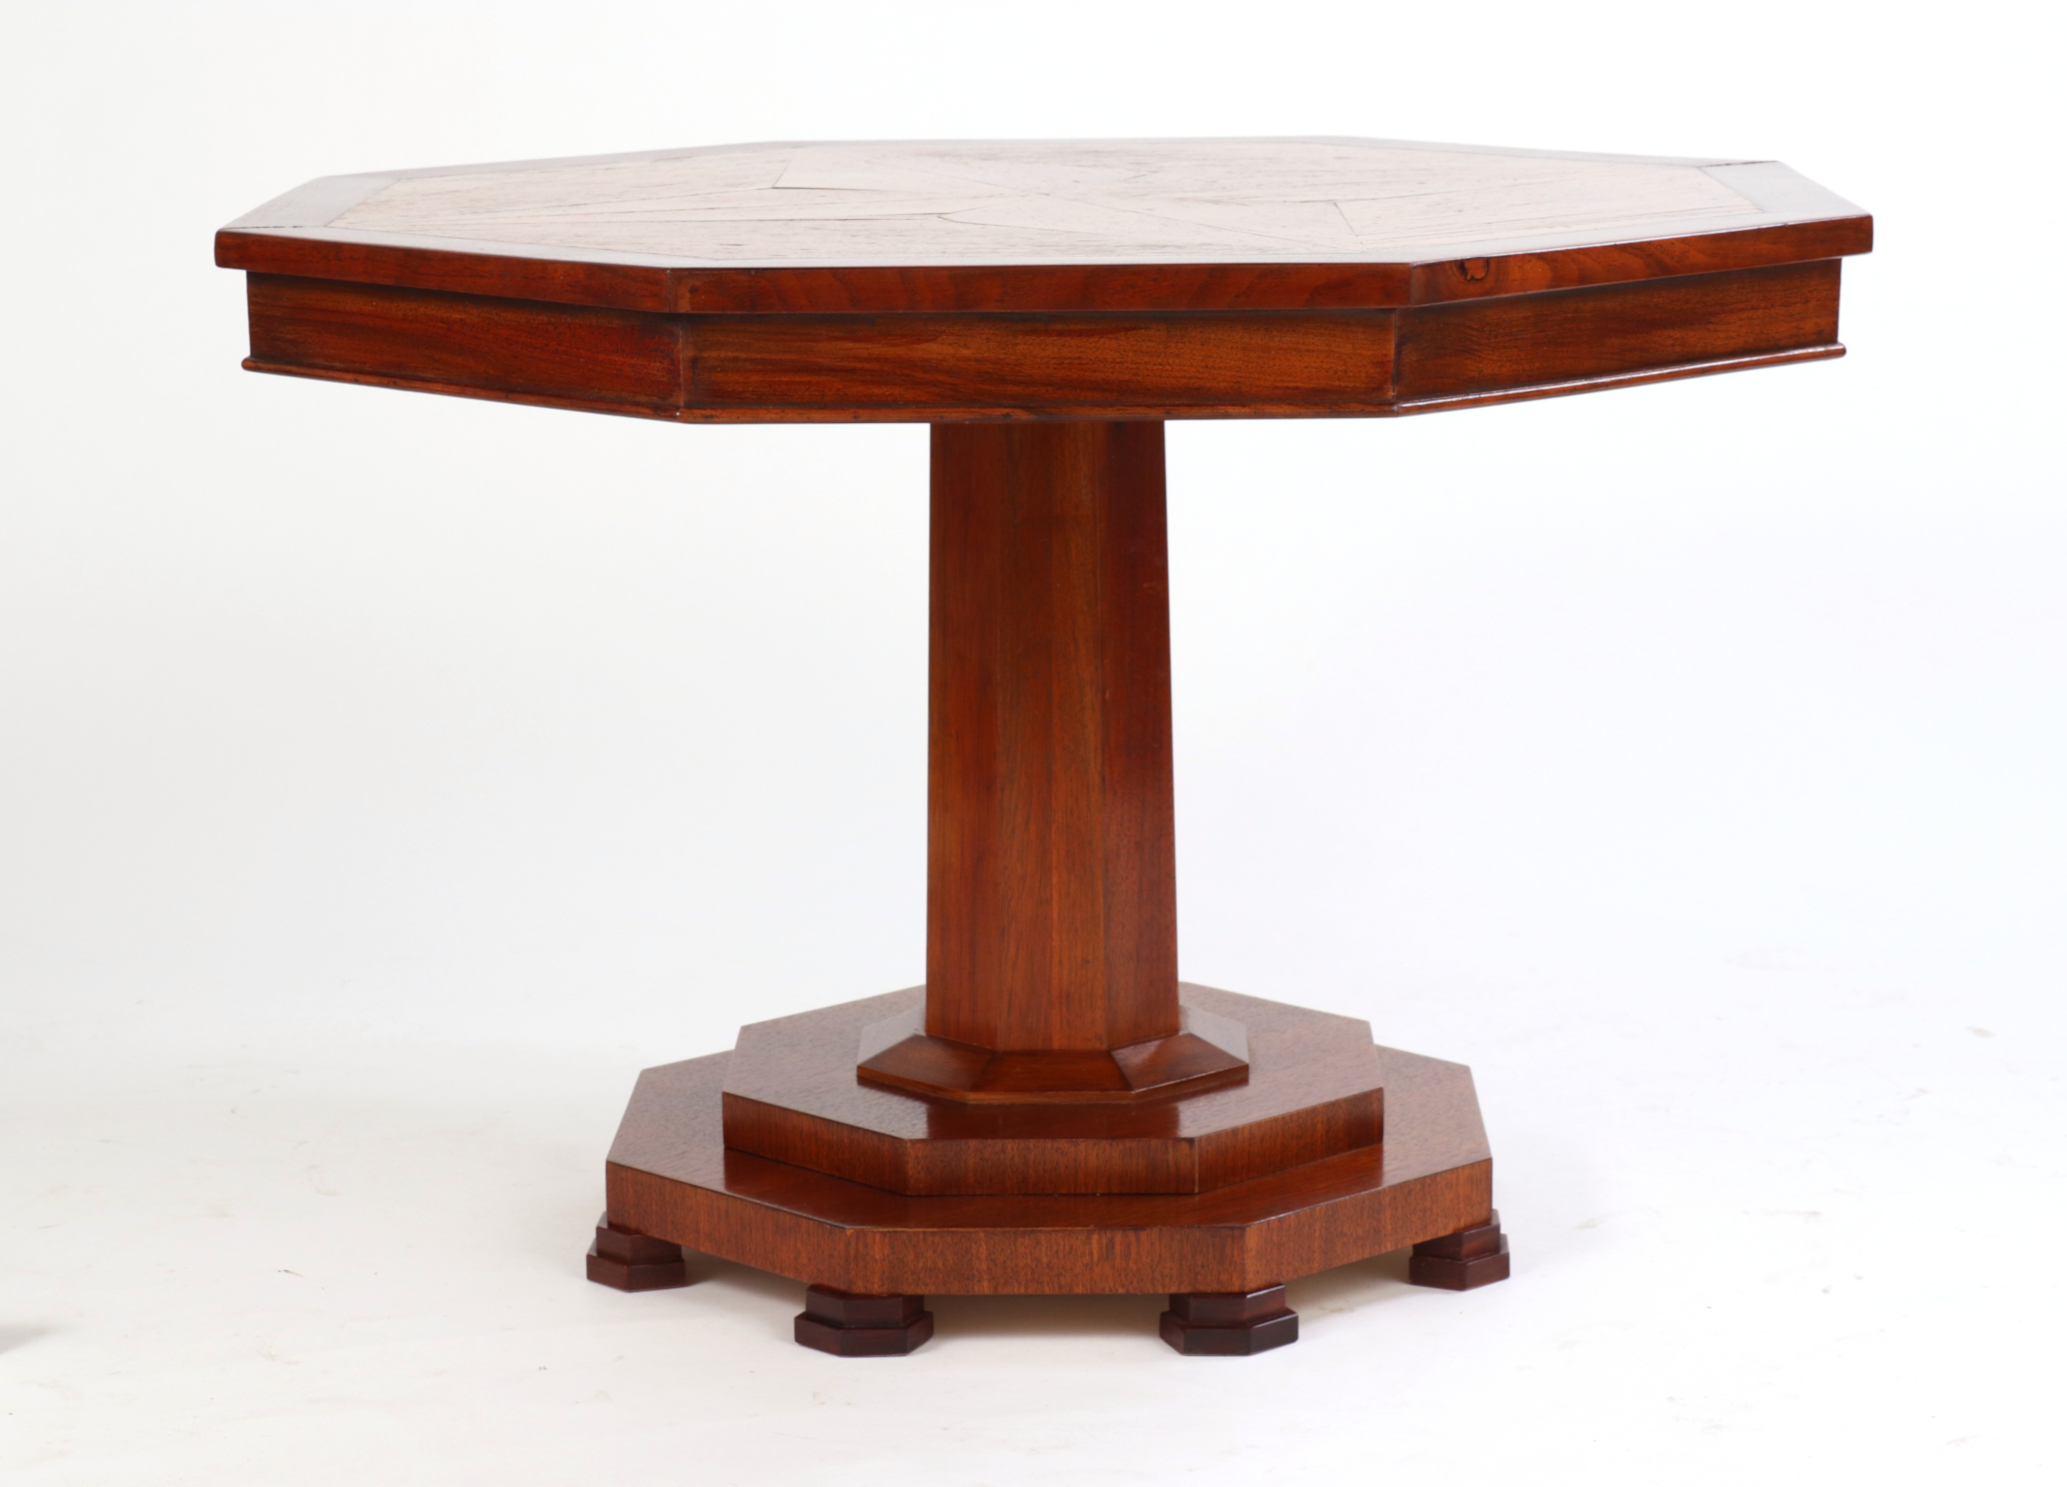 Oak Floor Panel Mounted as a Coffee Table, 19th c.